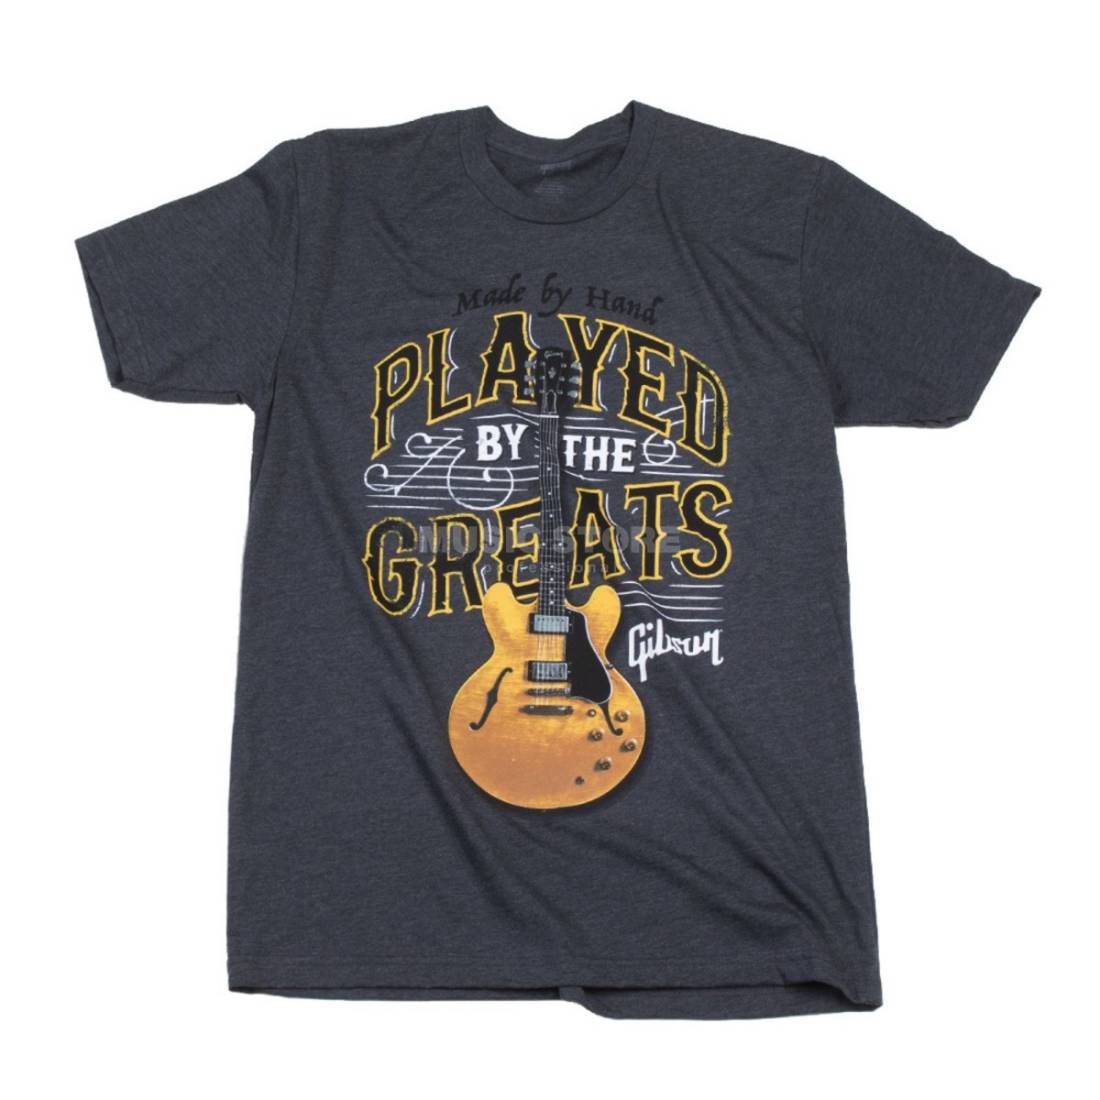 Played By the Greats Grey T-Shirt - Medium